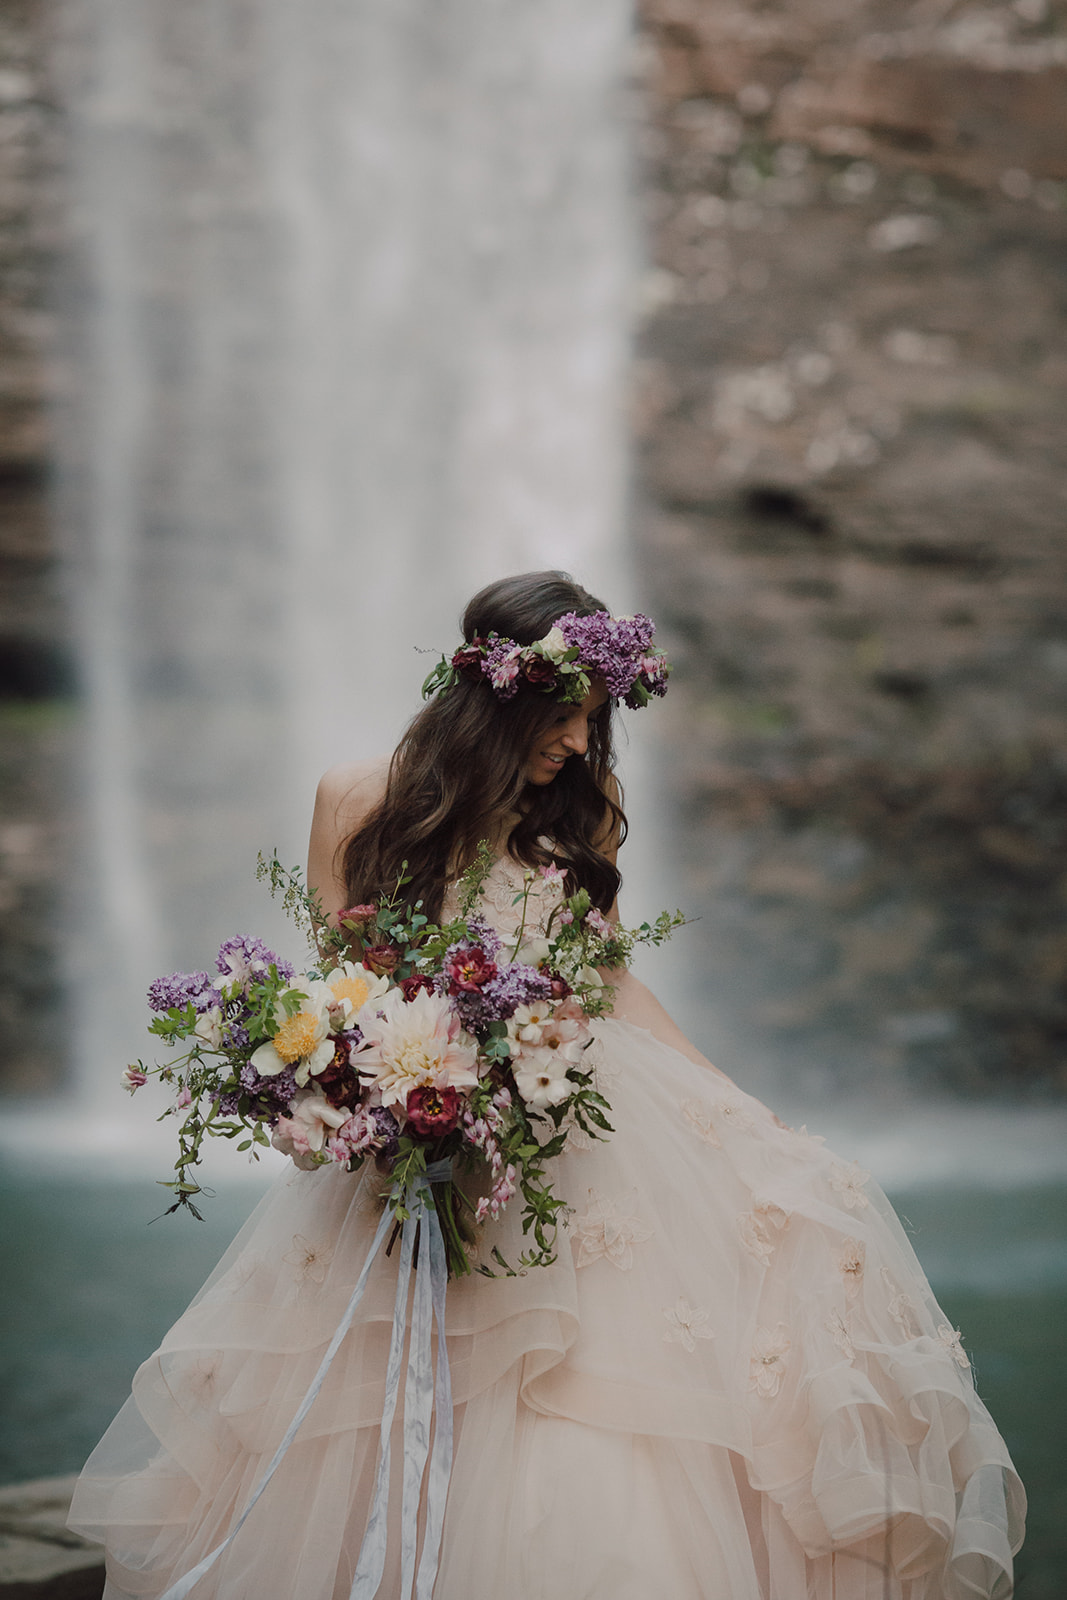 Lush bridal bouquet with lilac, peonies, cafe au lait dahlias, and butterfly ranunculus // Nashville Waterfall Elopement Floral Design